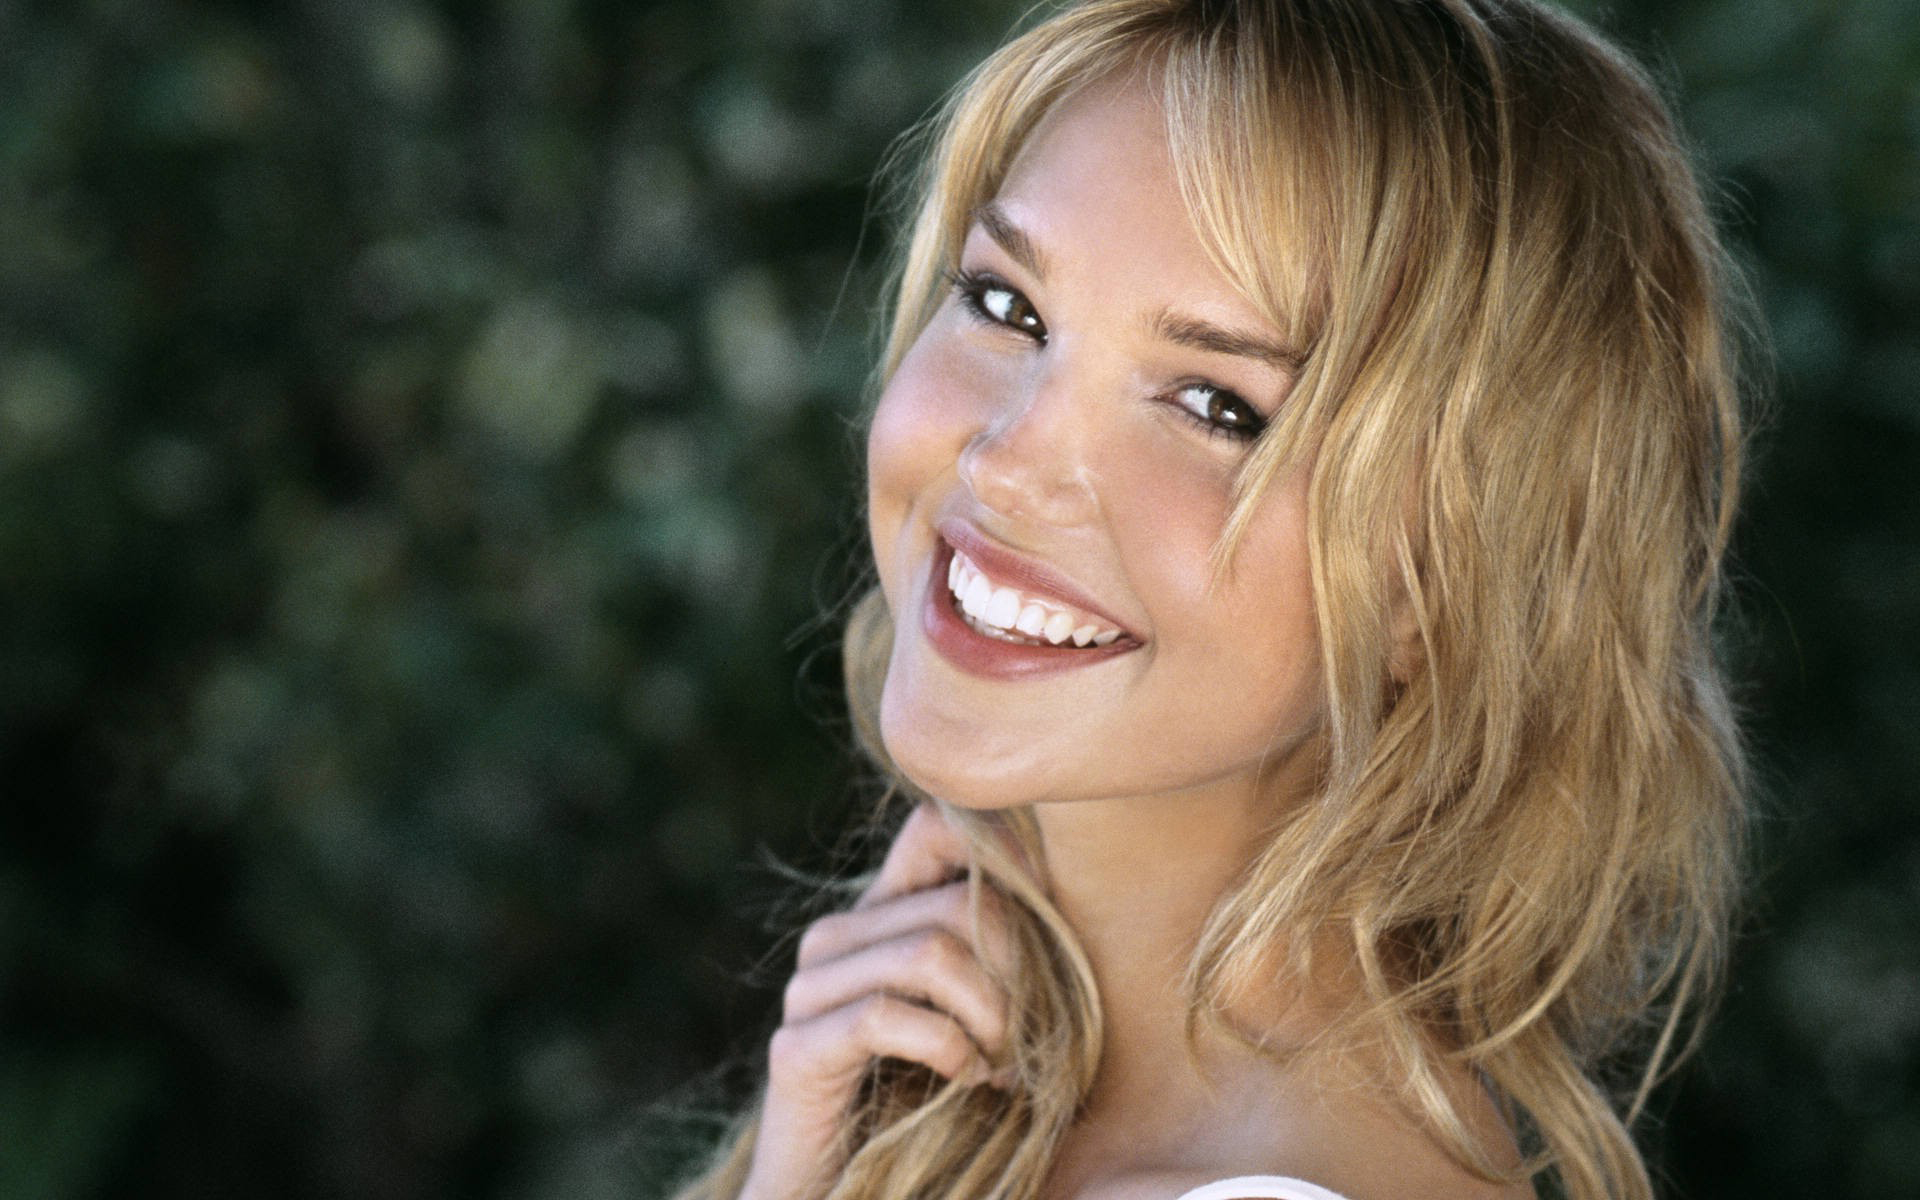 Arielle Kebbel Wallpaper Image Photos Pictures Background